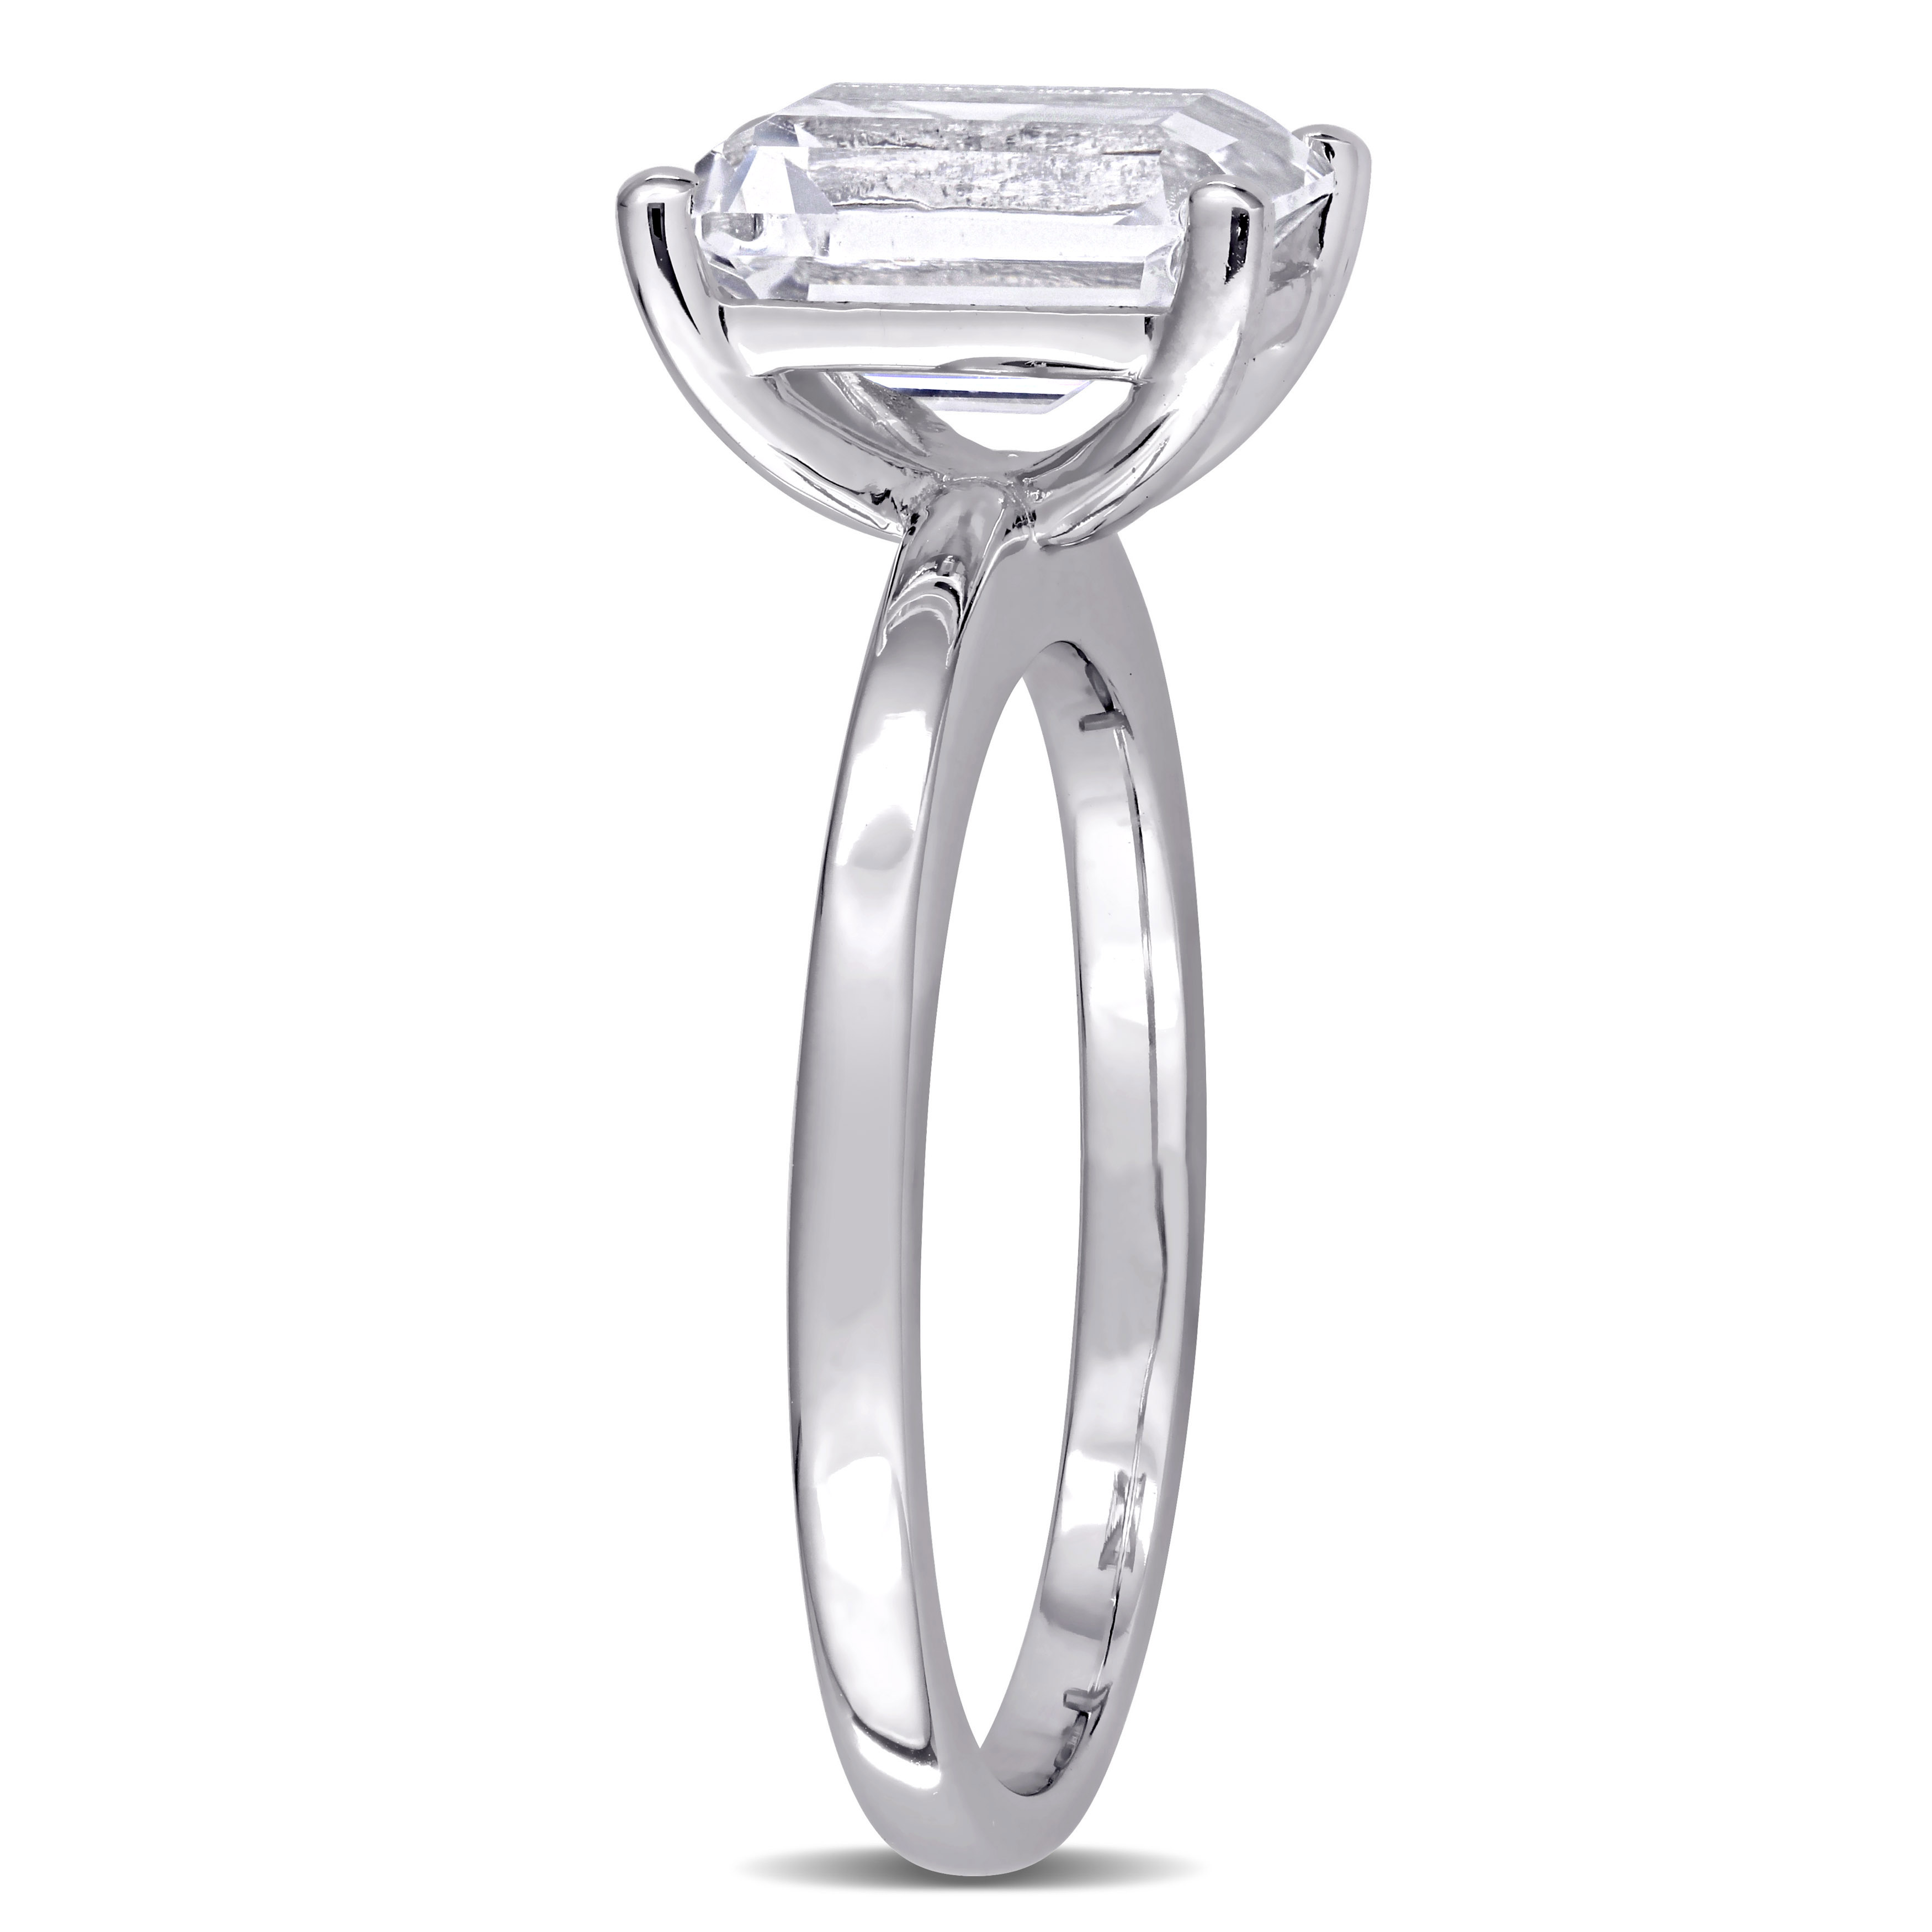 3 3/4 CT TGW Emerald-Cut Created White Sapphire Square Solitaire Ring in 10k White Gold